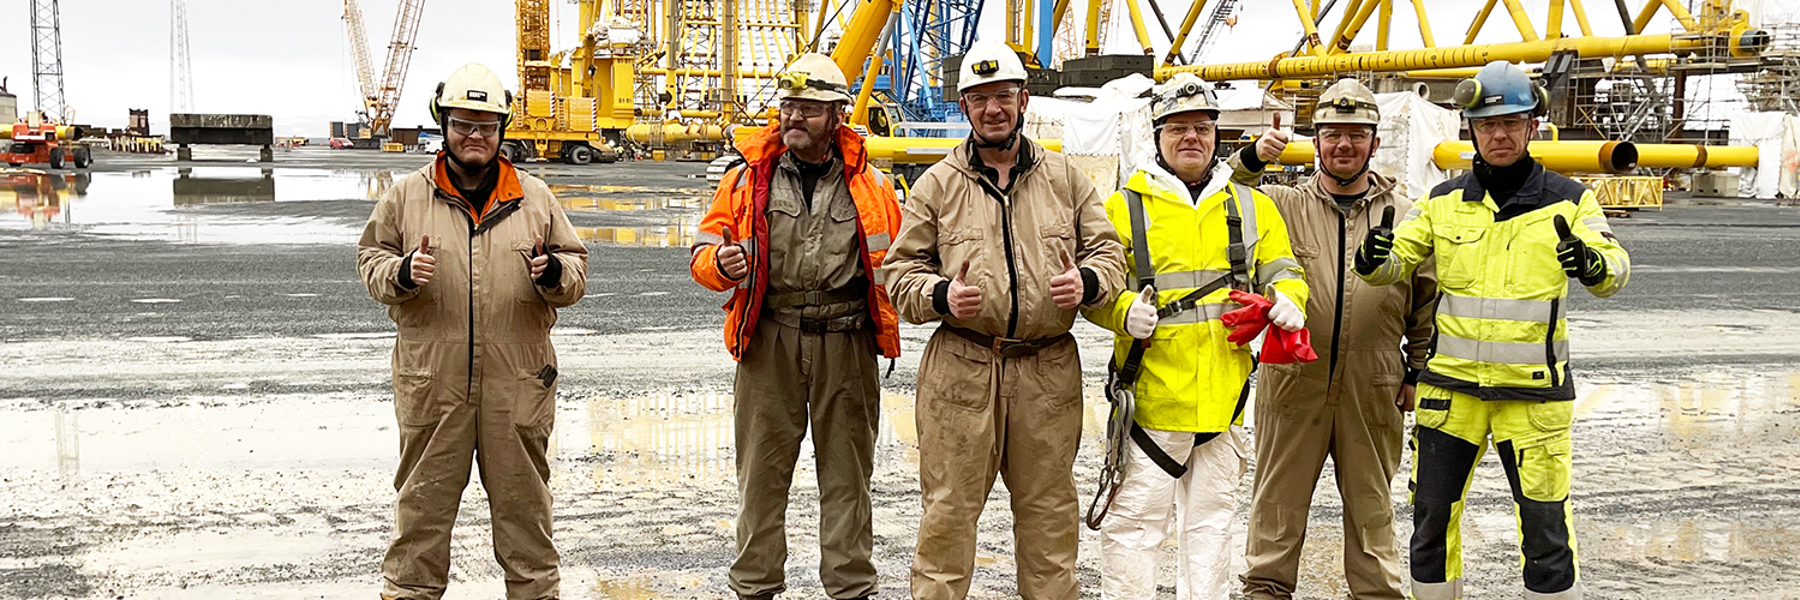 Beerenberg employees are looking forward to continue the work for Aker Solutions in Verdal. Photo: Beerenberg